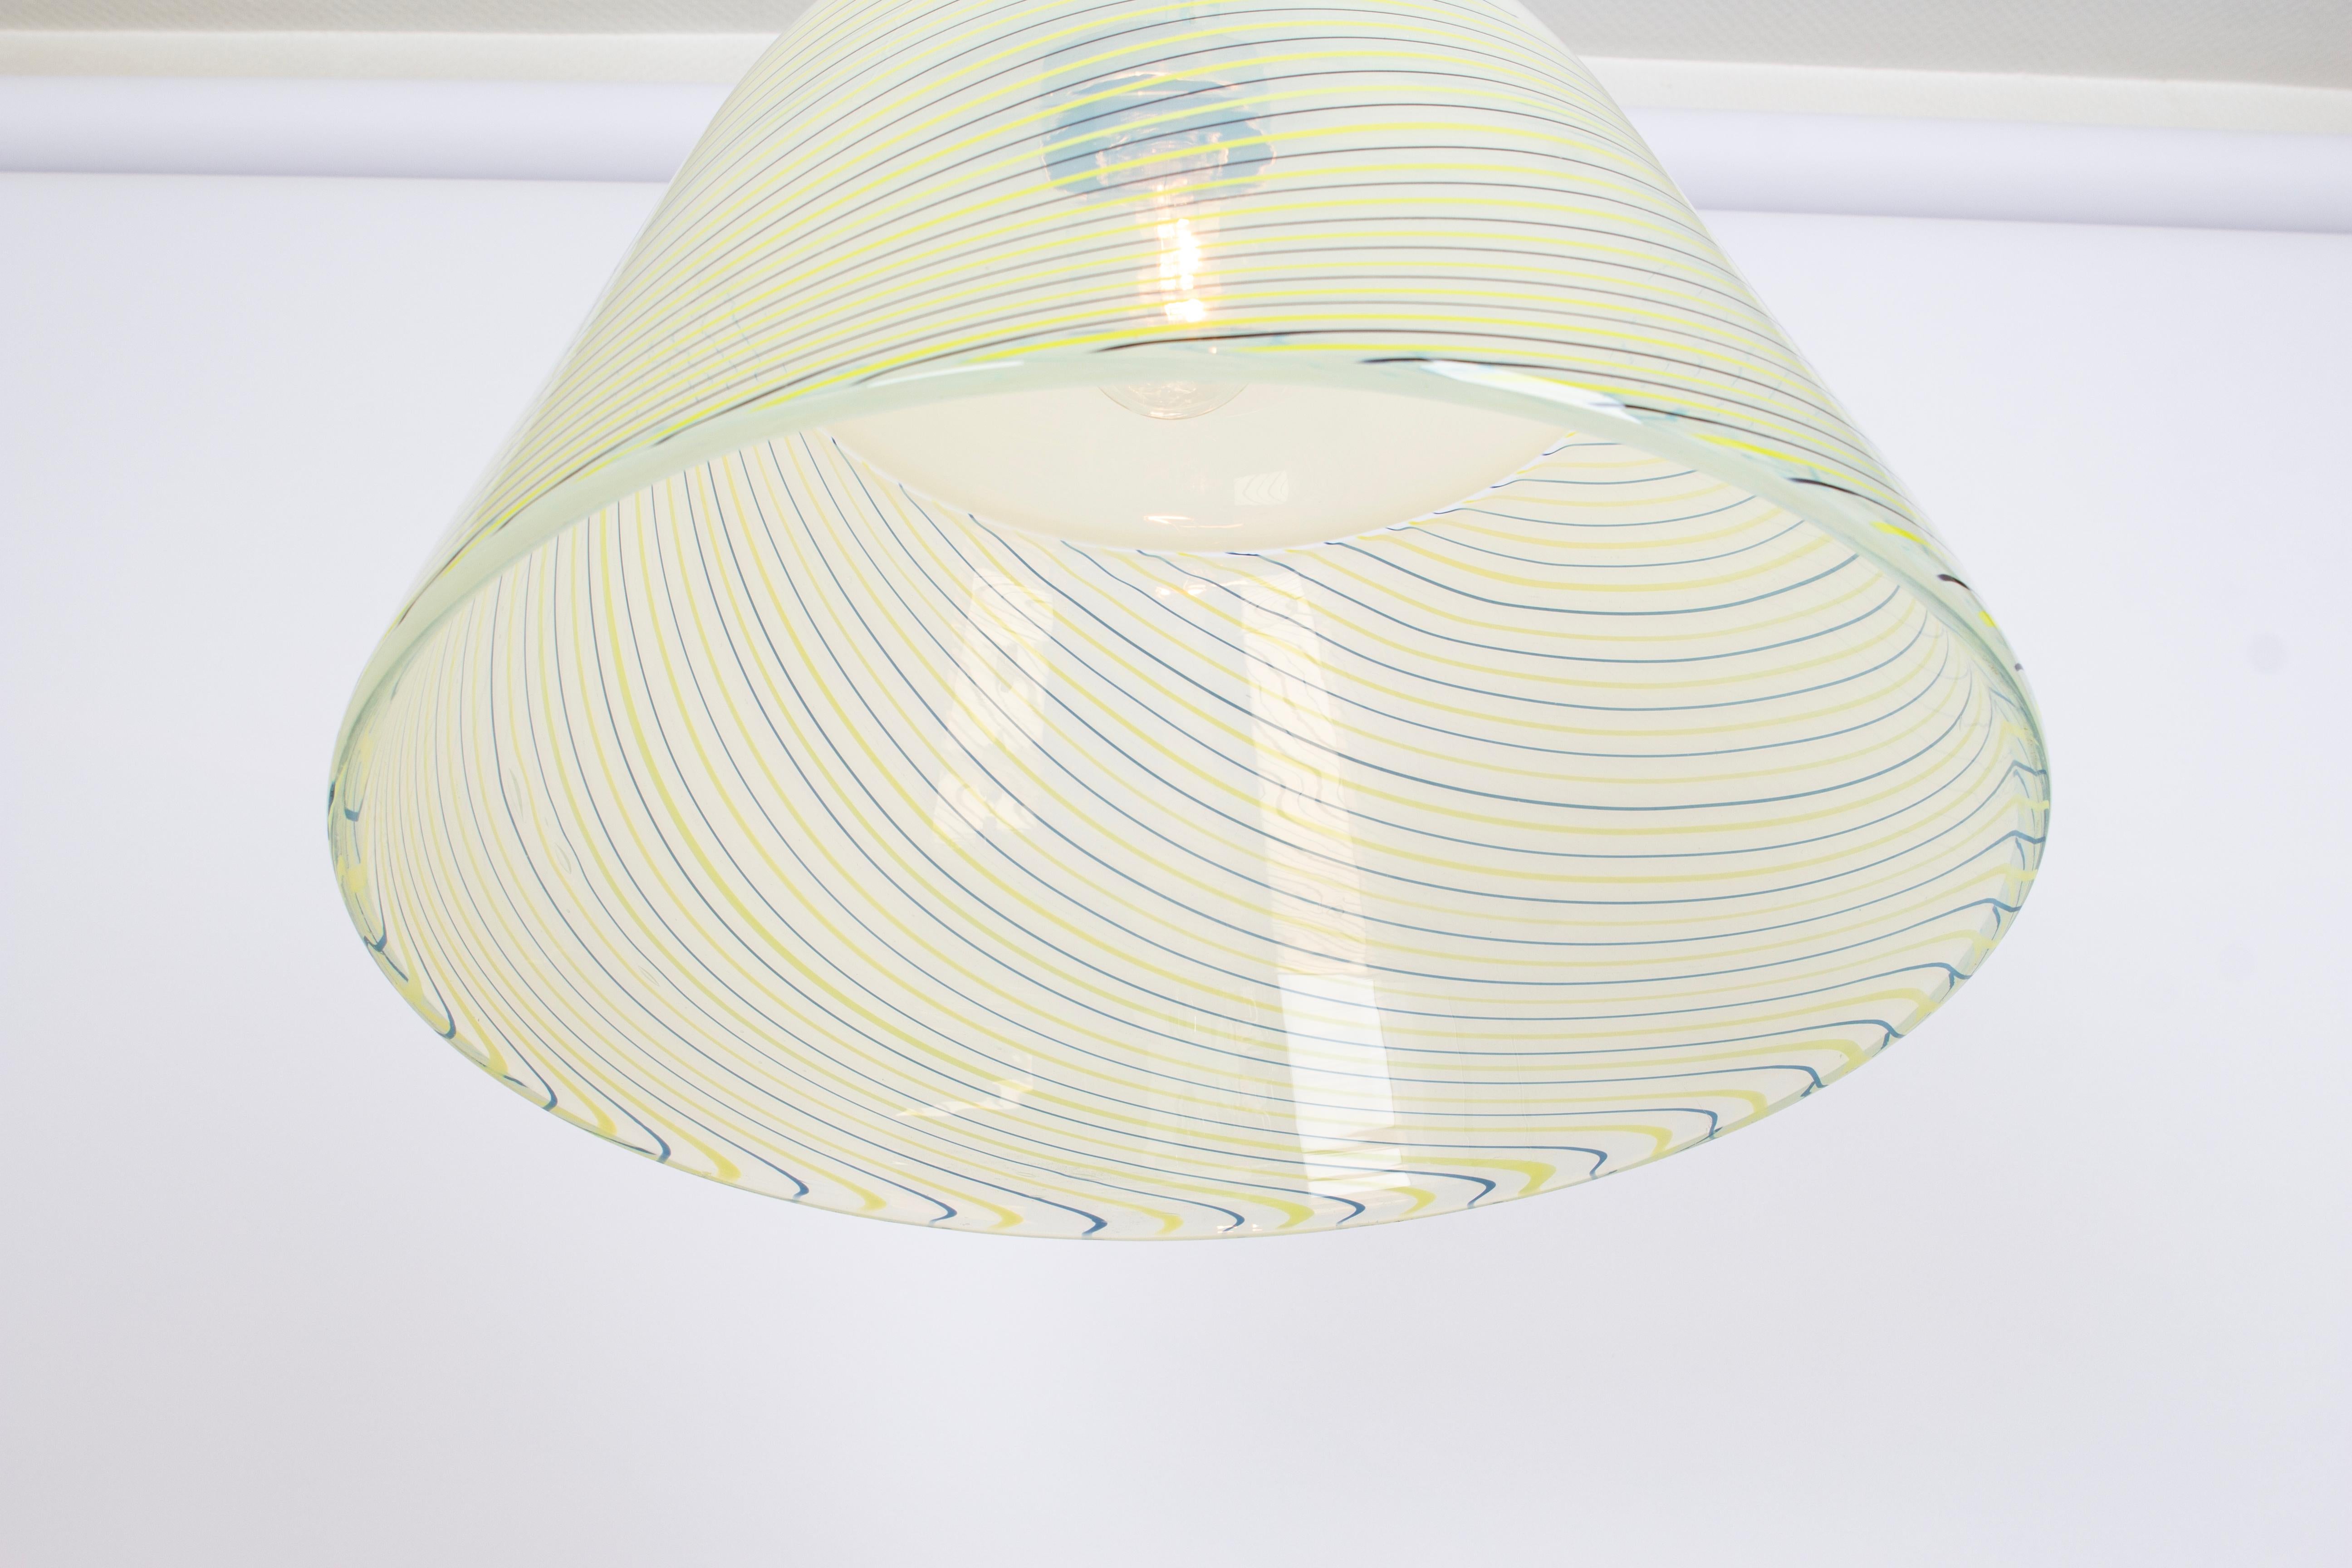 Large Pendant Light in style of Kalmar-Fazzoletto, Italy, 1970s For Sale 3